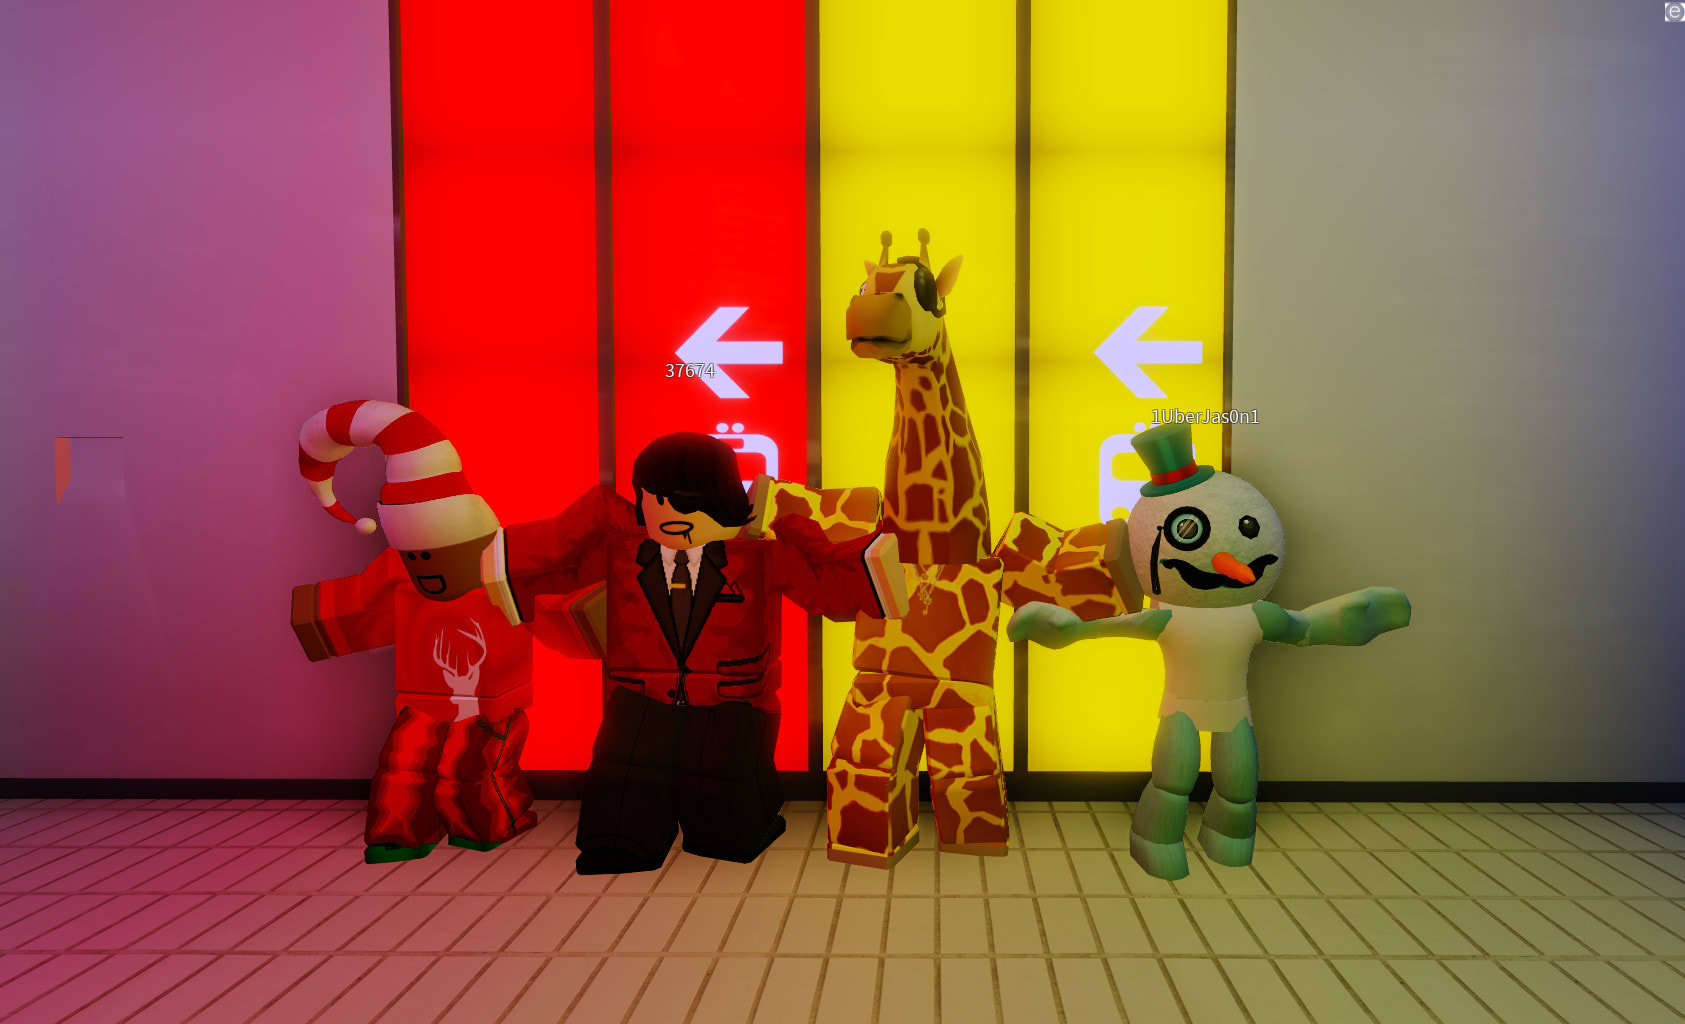 Play Roblox Games With You With My Friends By Localsellout